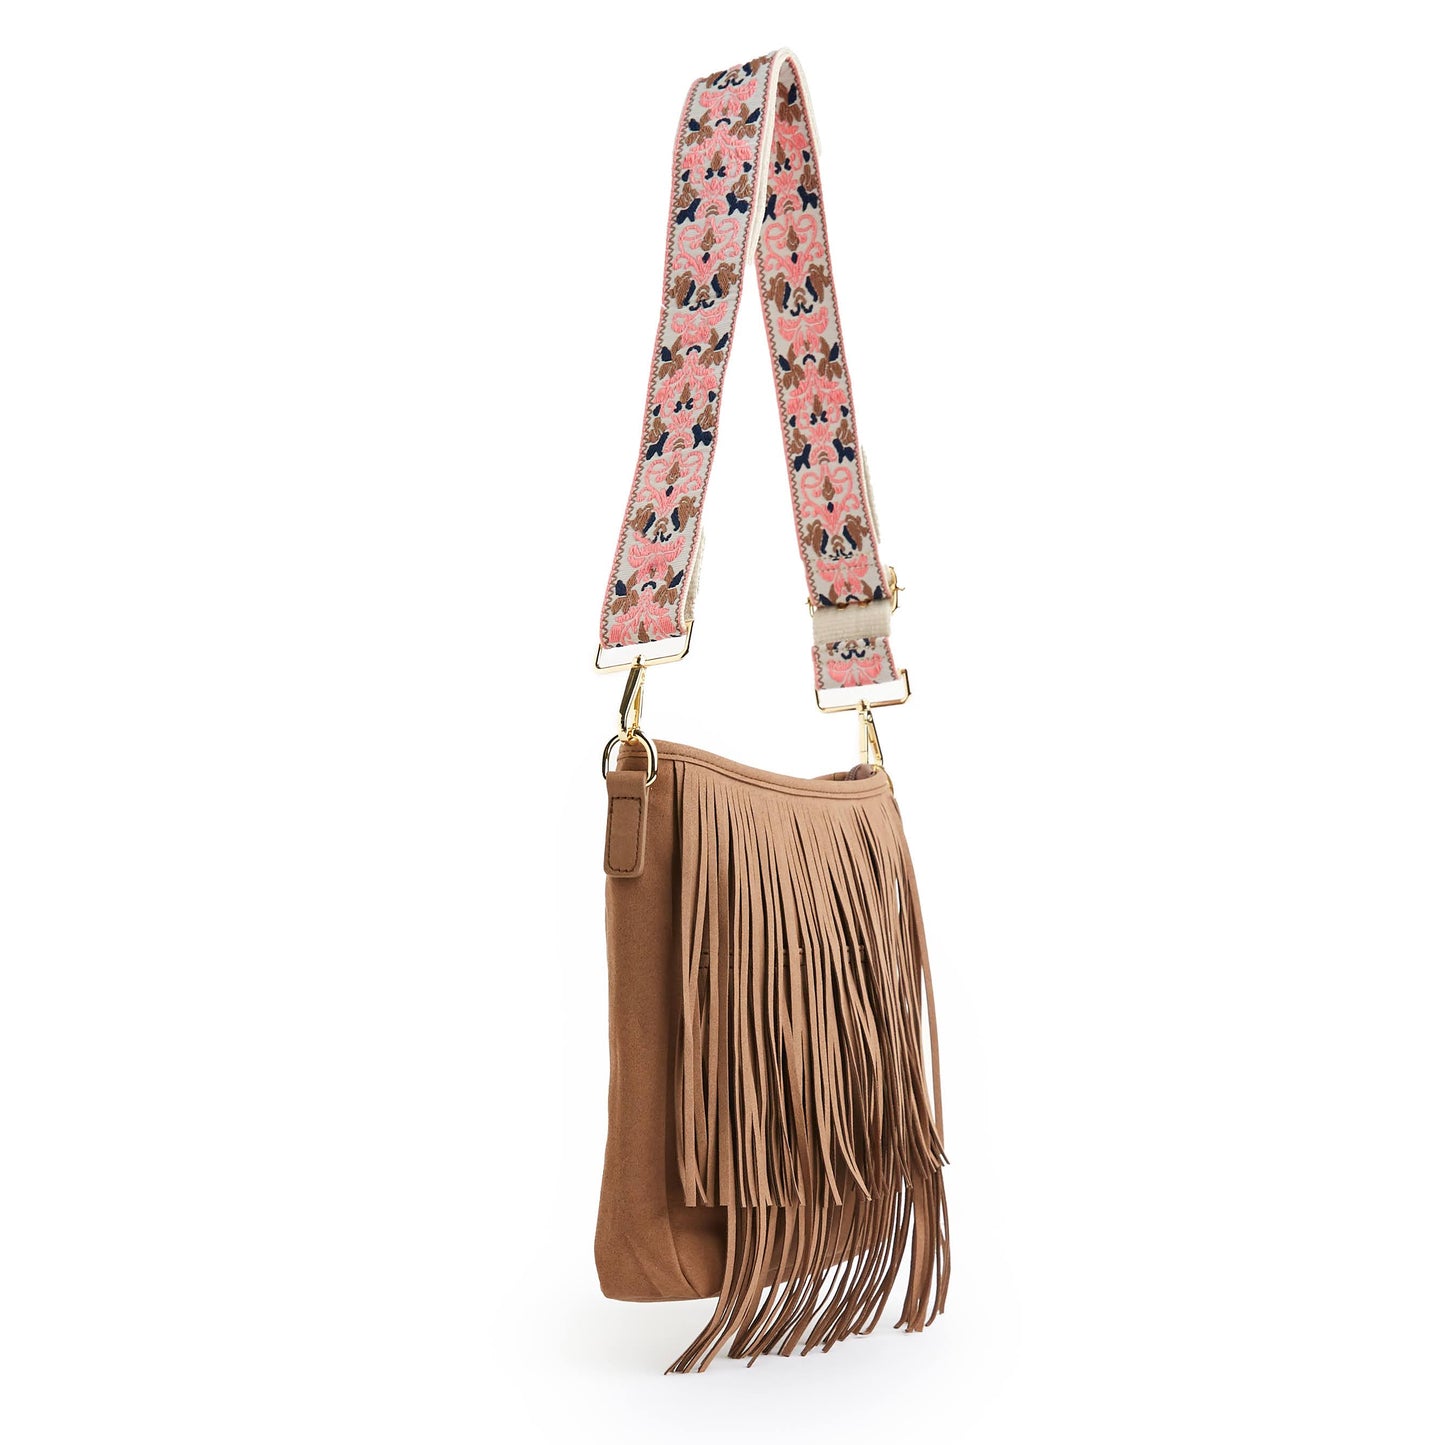 Western Style Fringe Bucket bag - Strap not included